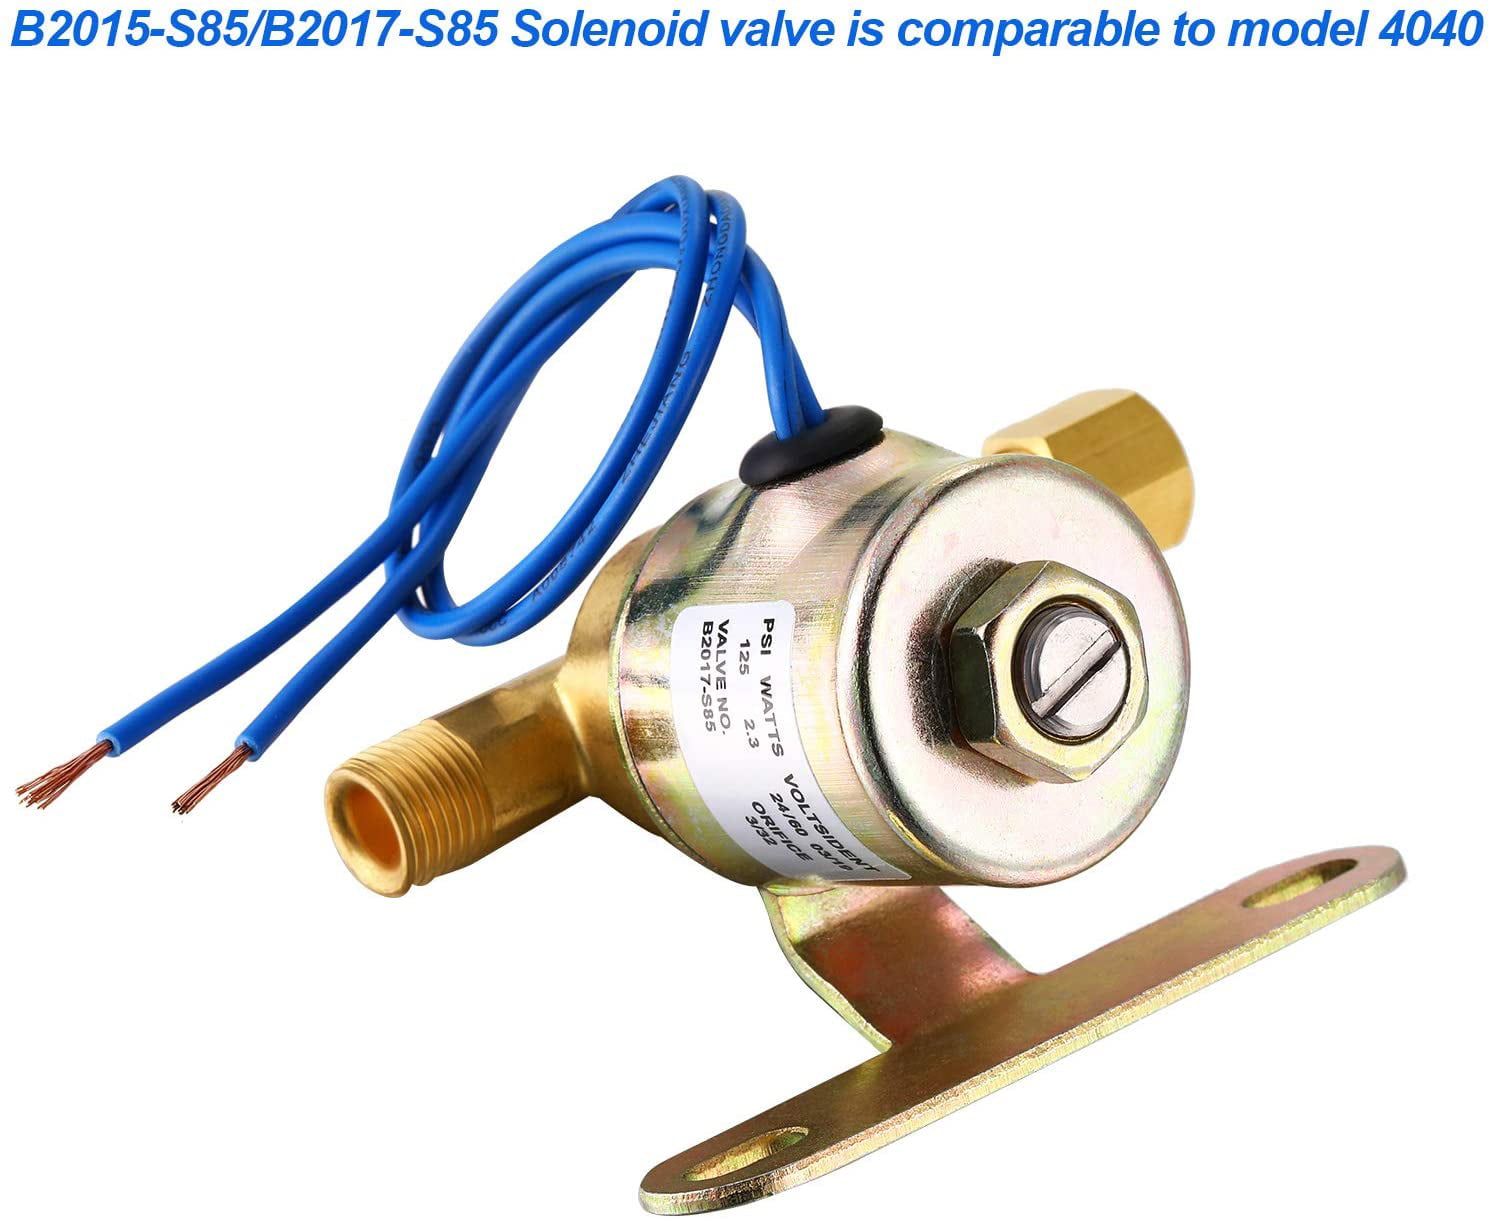 Humidifier Water Solenoid Valve 4040 24V Compatible with Aprilaire Valve-Replaces B2015-S85 B2017-S85 220 224 400 400A 400M 440 500 500A 500M 550 550A 558 560 560A 600 600A 600M 700 700A 700M 760 768 